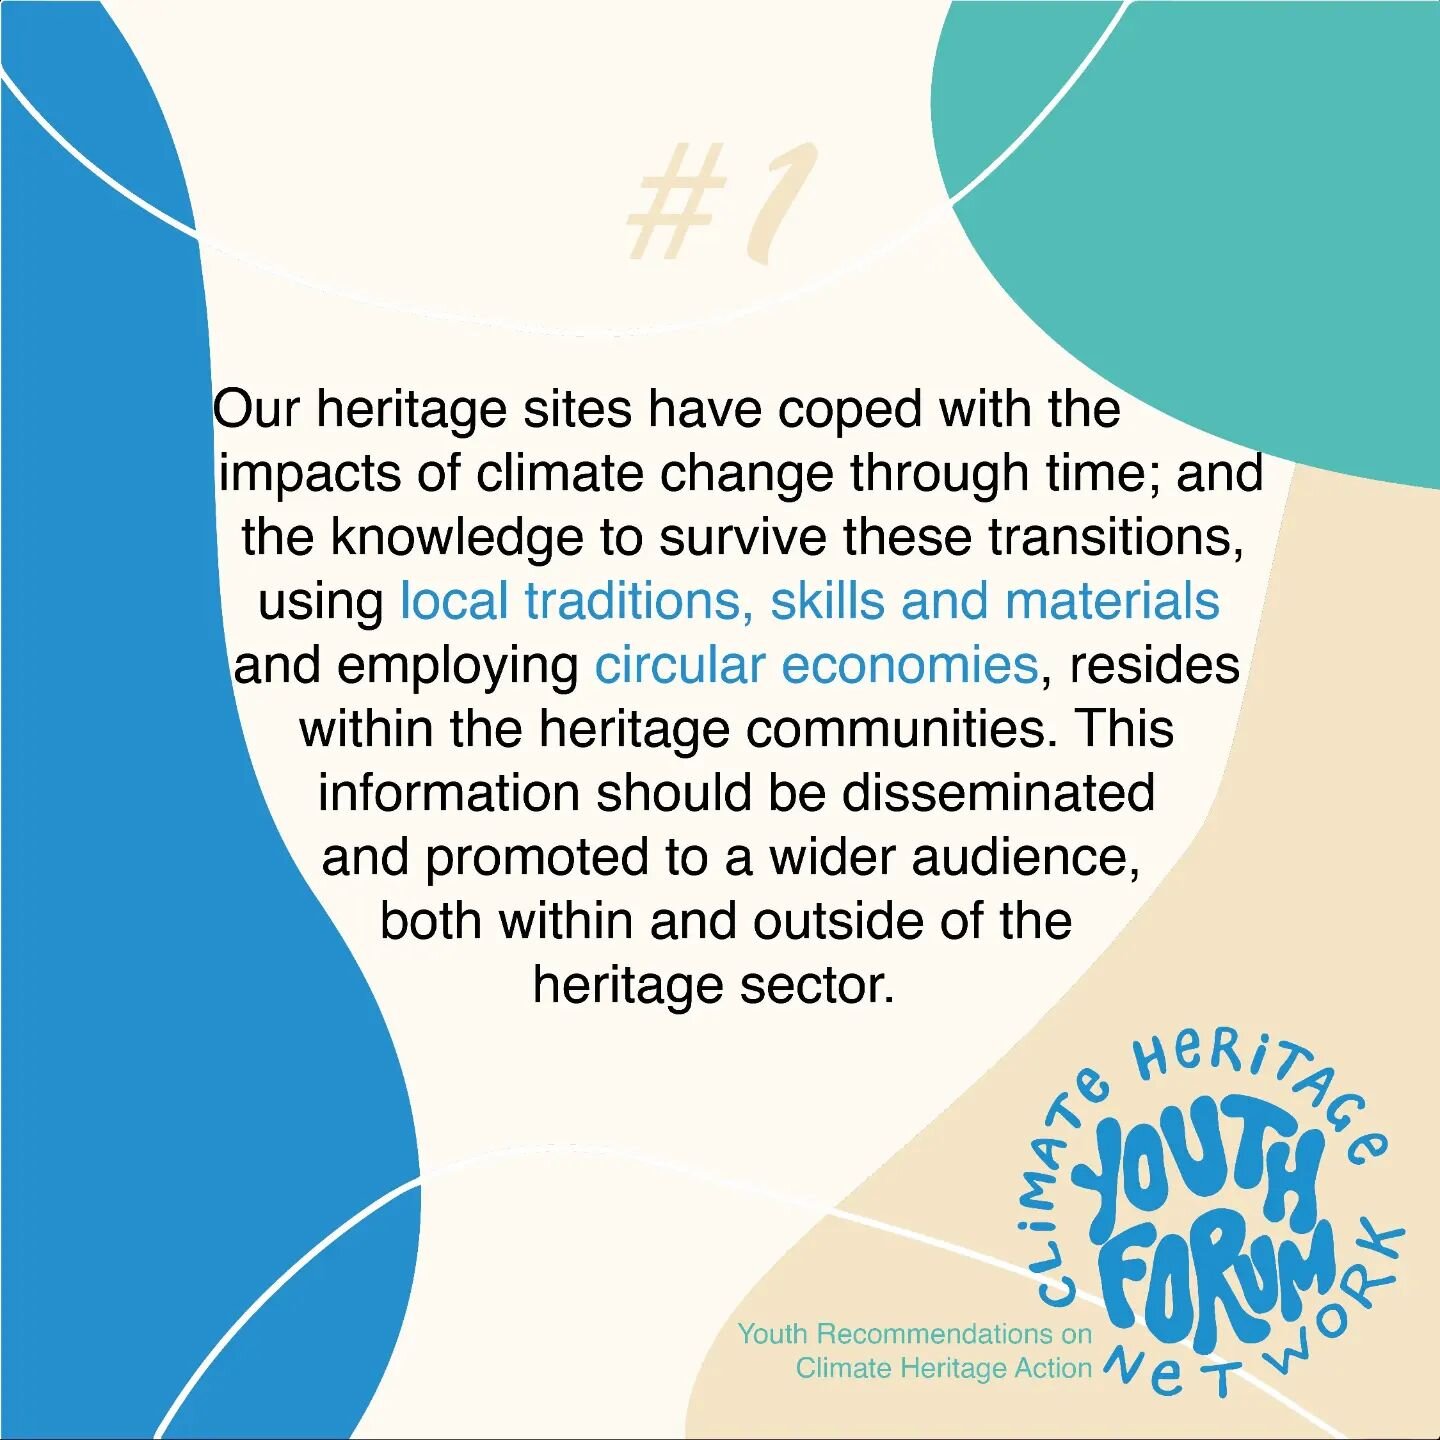 Last year at COP26 we launched our Youth Recommendations, this year during COP27 we share them again. 

These recommendations inform everything we do here in the CHN Youth Forum. 

We'd love to be able to share them in as many languages as possible s